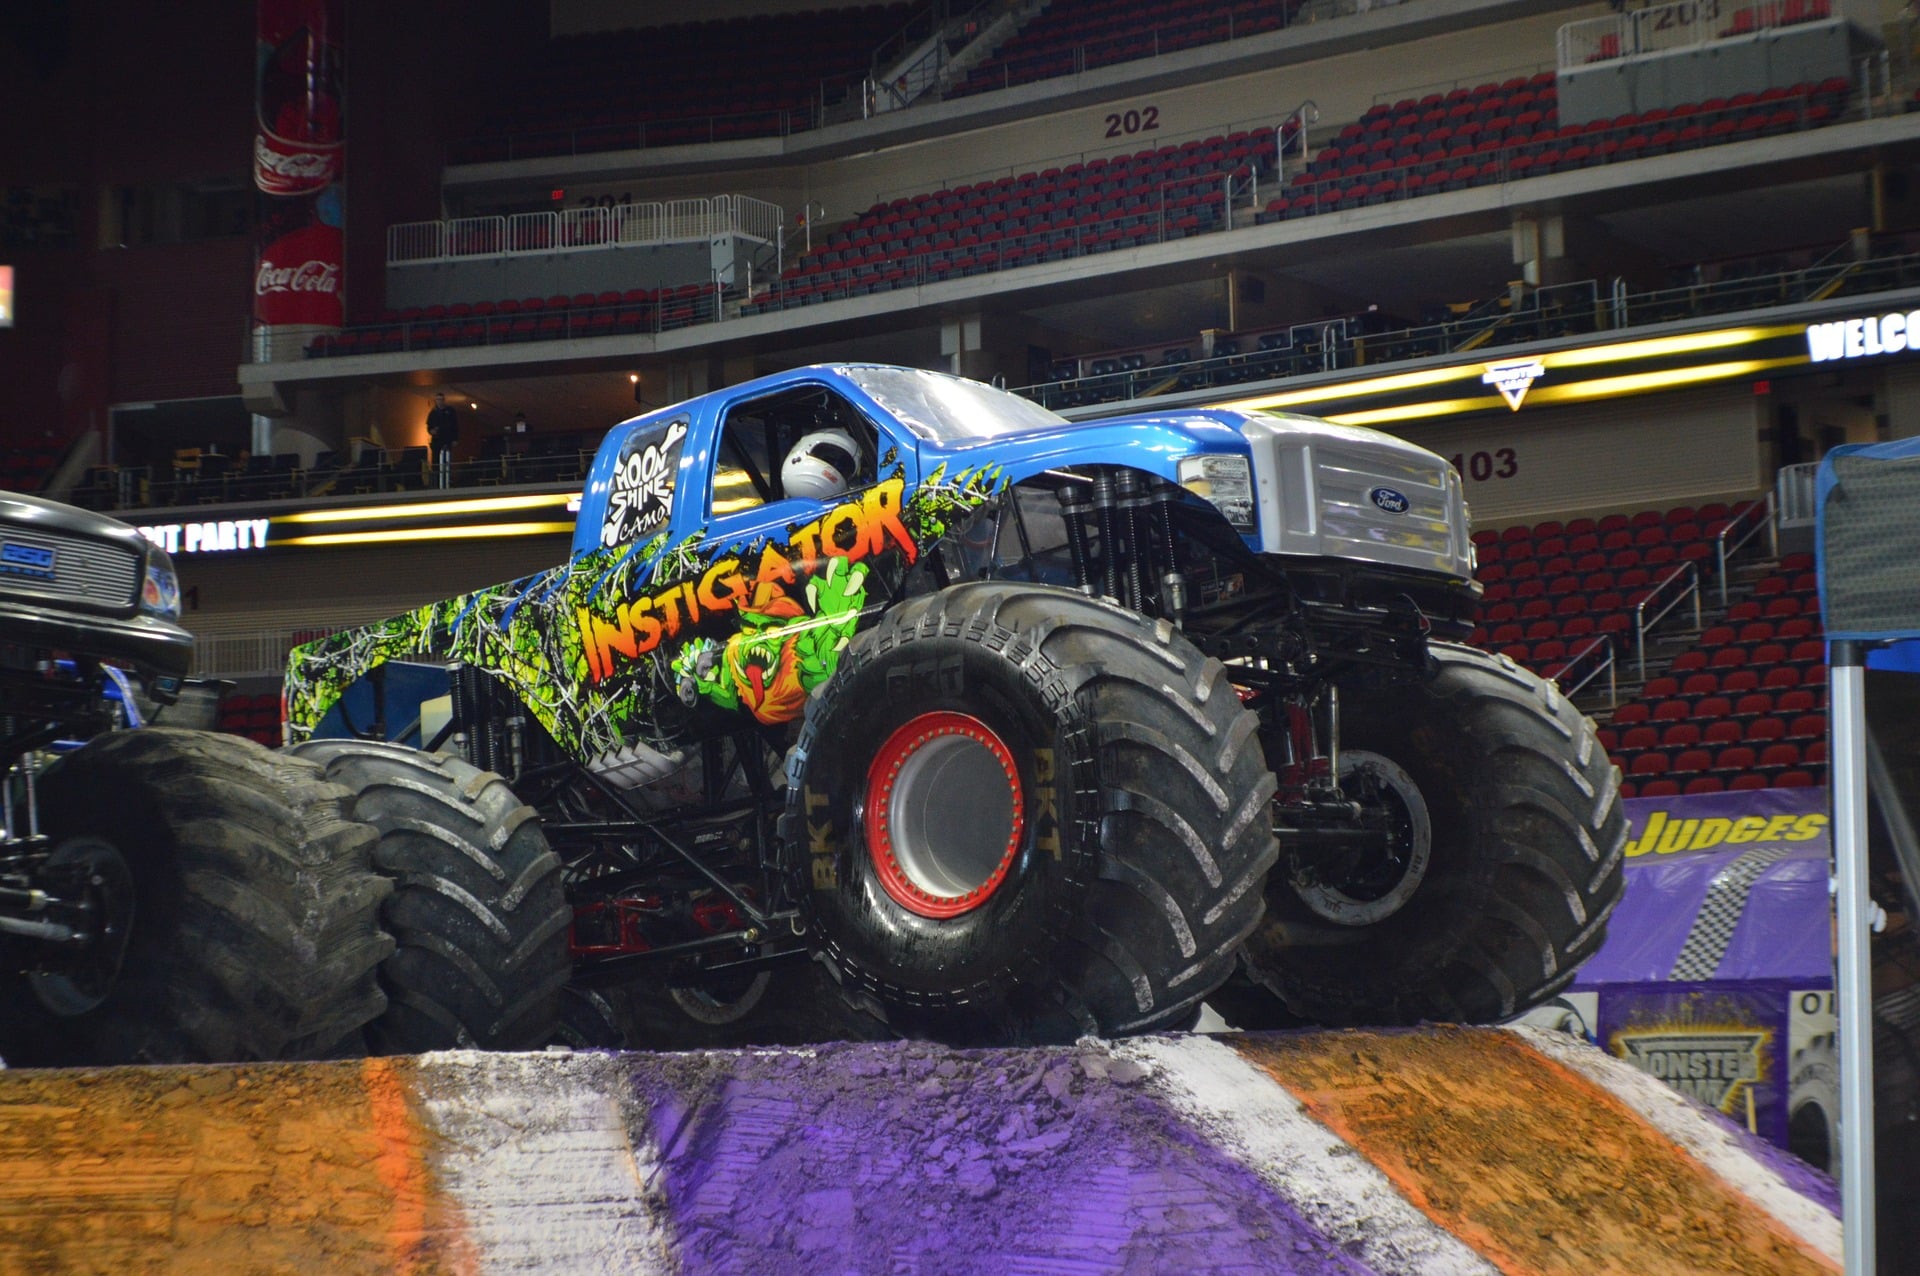 Step aside 'Monster Mash,' Monster Jam is coming to Orlando on Saturday, Orlando